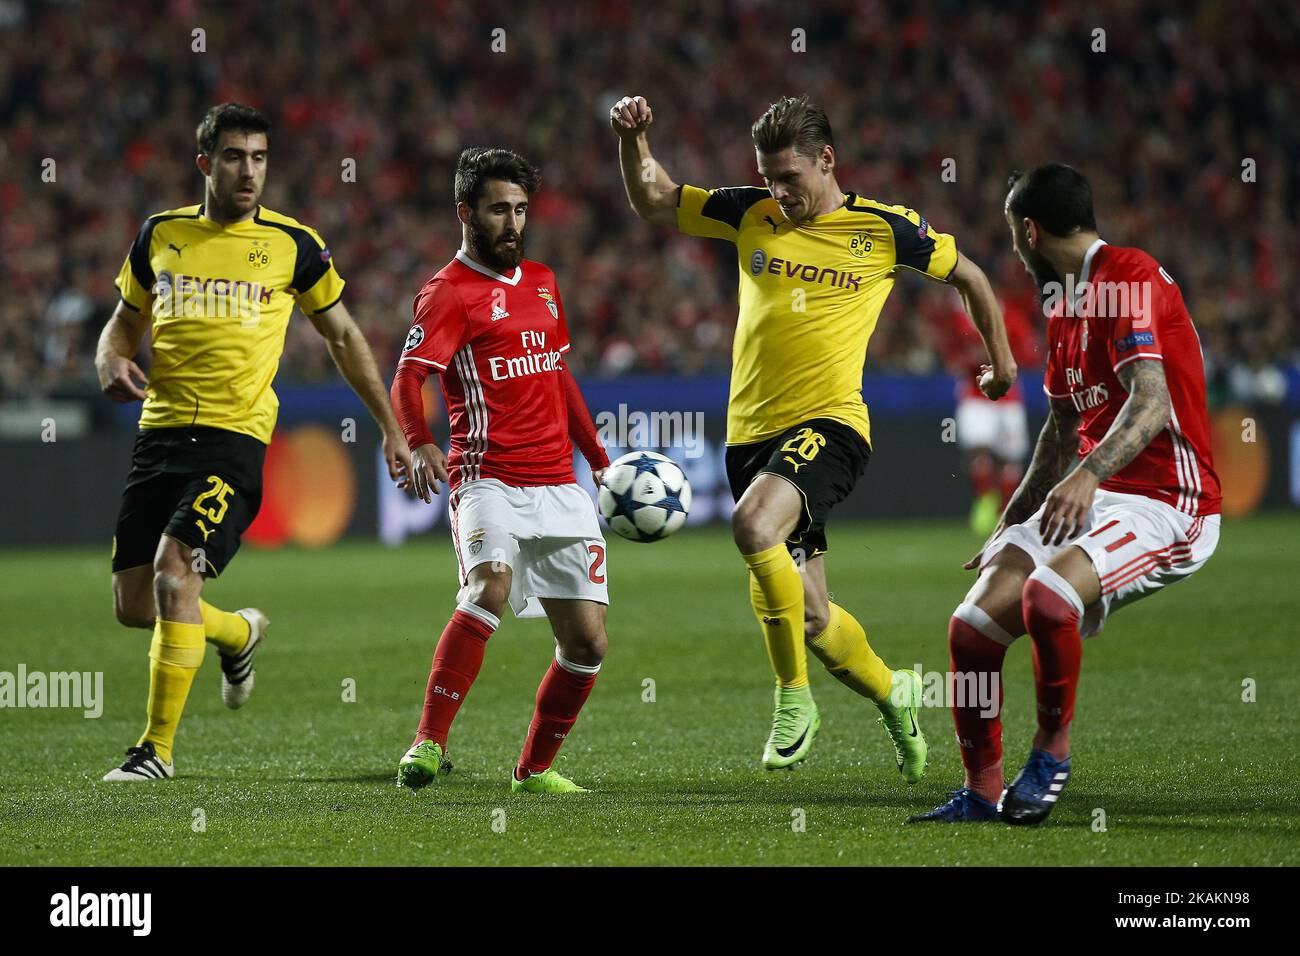 Benfica's midfielder Rafa Silva (2nd L) vies for the ball with Dortmund's defender Sokratis Papastathopoulos (L) and Dortmund's defender Lukasz Piszczek (2nd R) during Champions League 2016/17 match between SL Benfica vs BVB Borussia Dortmund, in Lisbon, on February 14, 2017. (Photo by Carlos Palma/NurPhoto) *** Please Use Credit from Credit Field *** Stock Photo